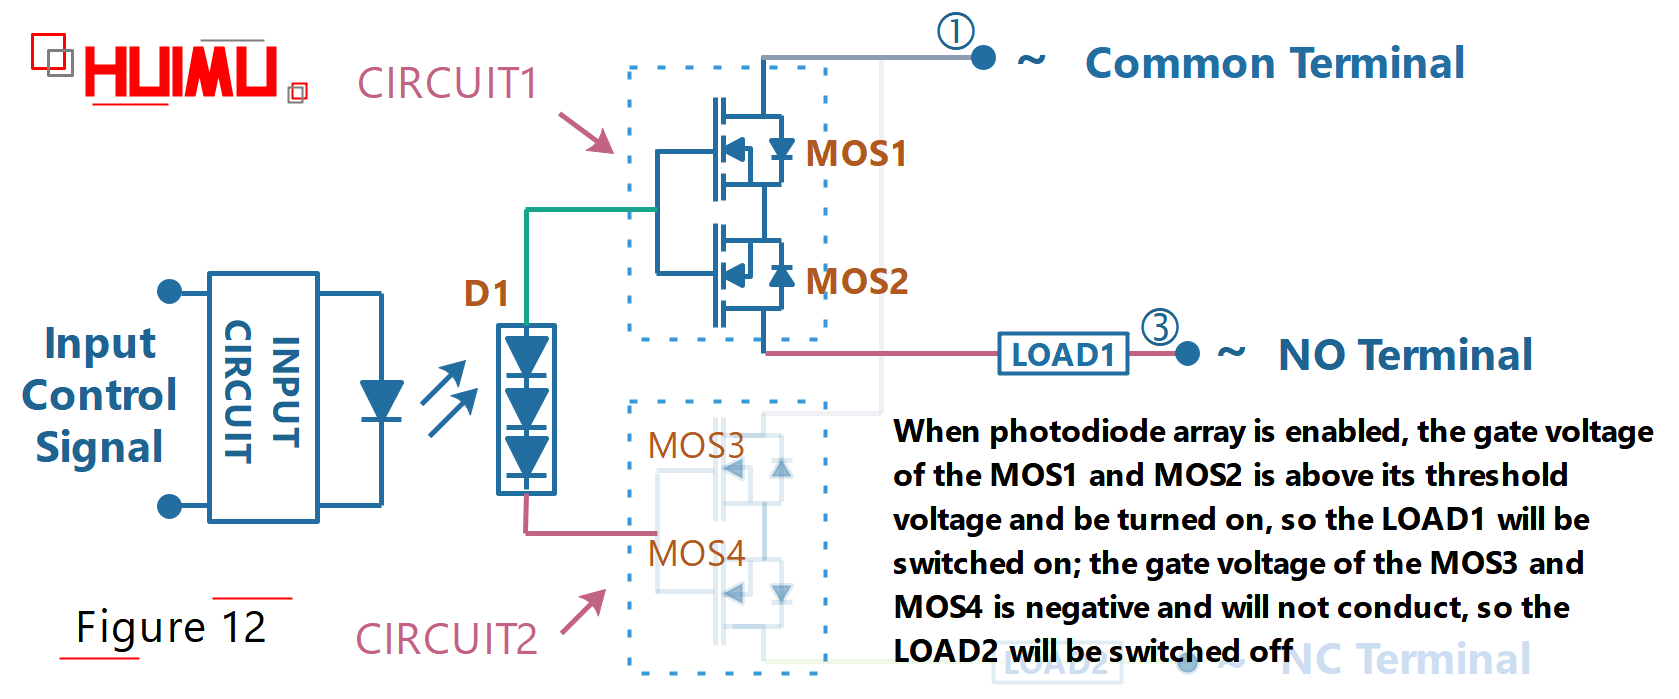 photodiode-array SPDT solid state relay circuit diagram, when the switch is turned on at AC power supply